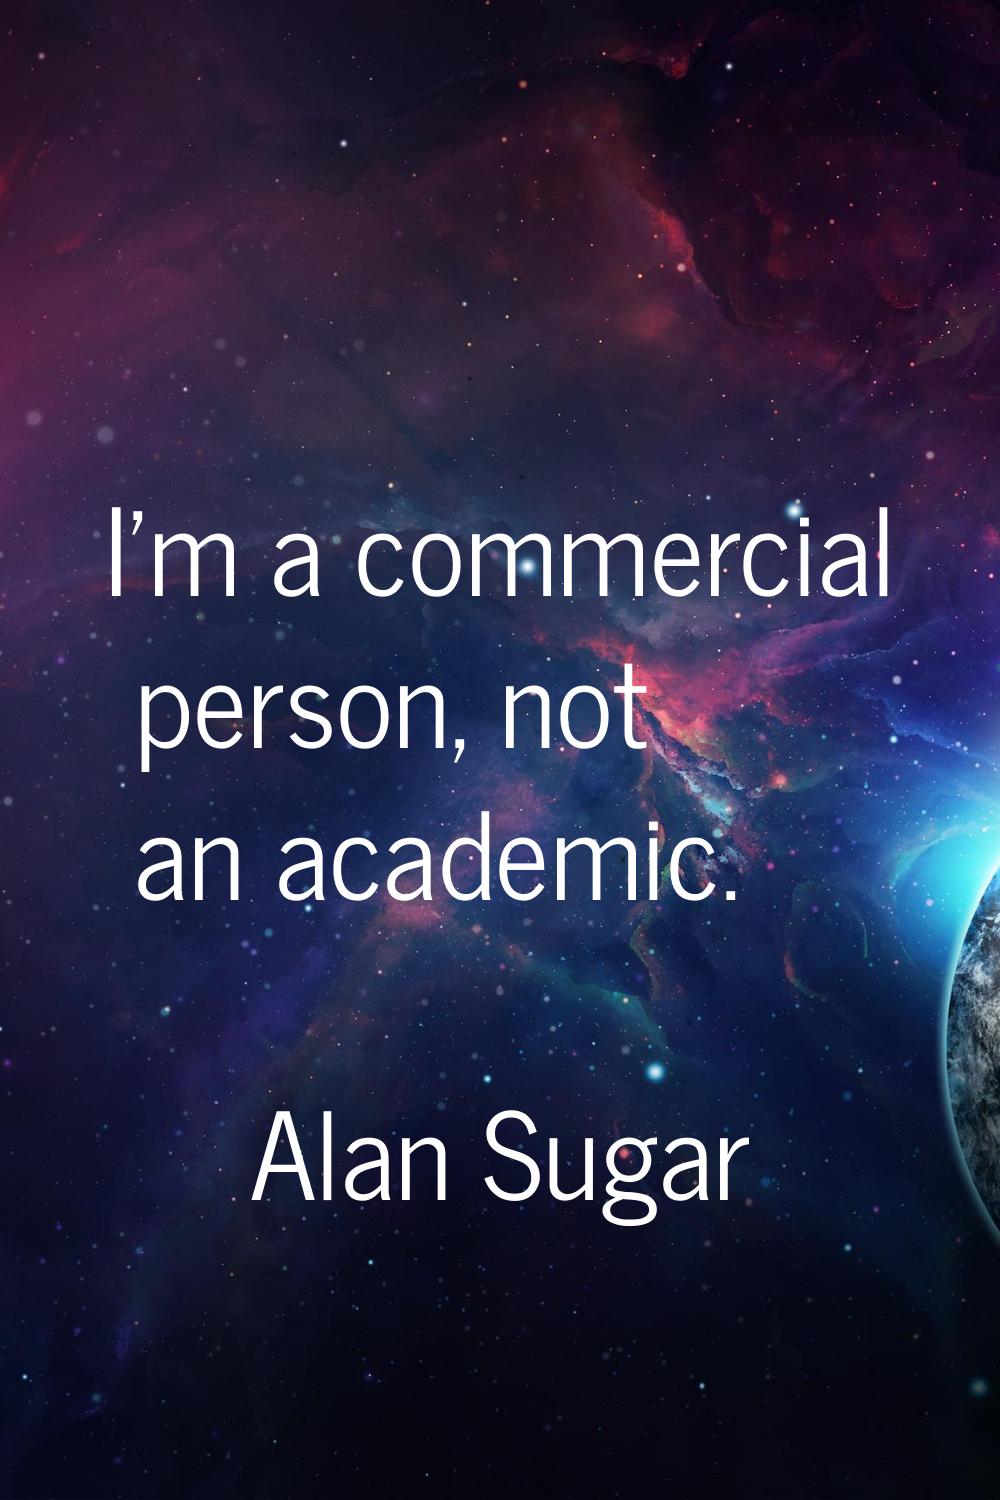 I'm a commercial person, not an academic.